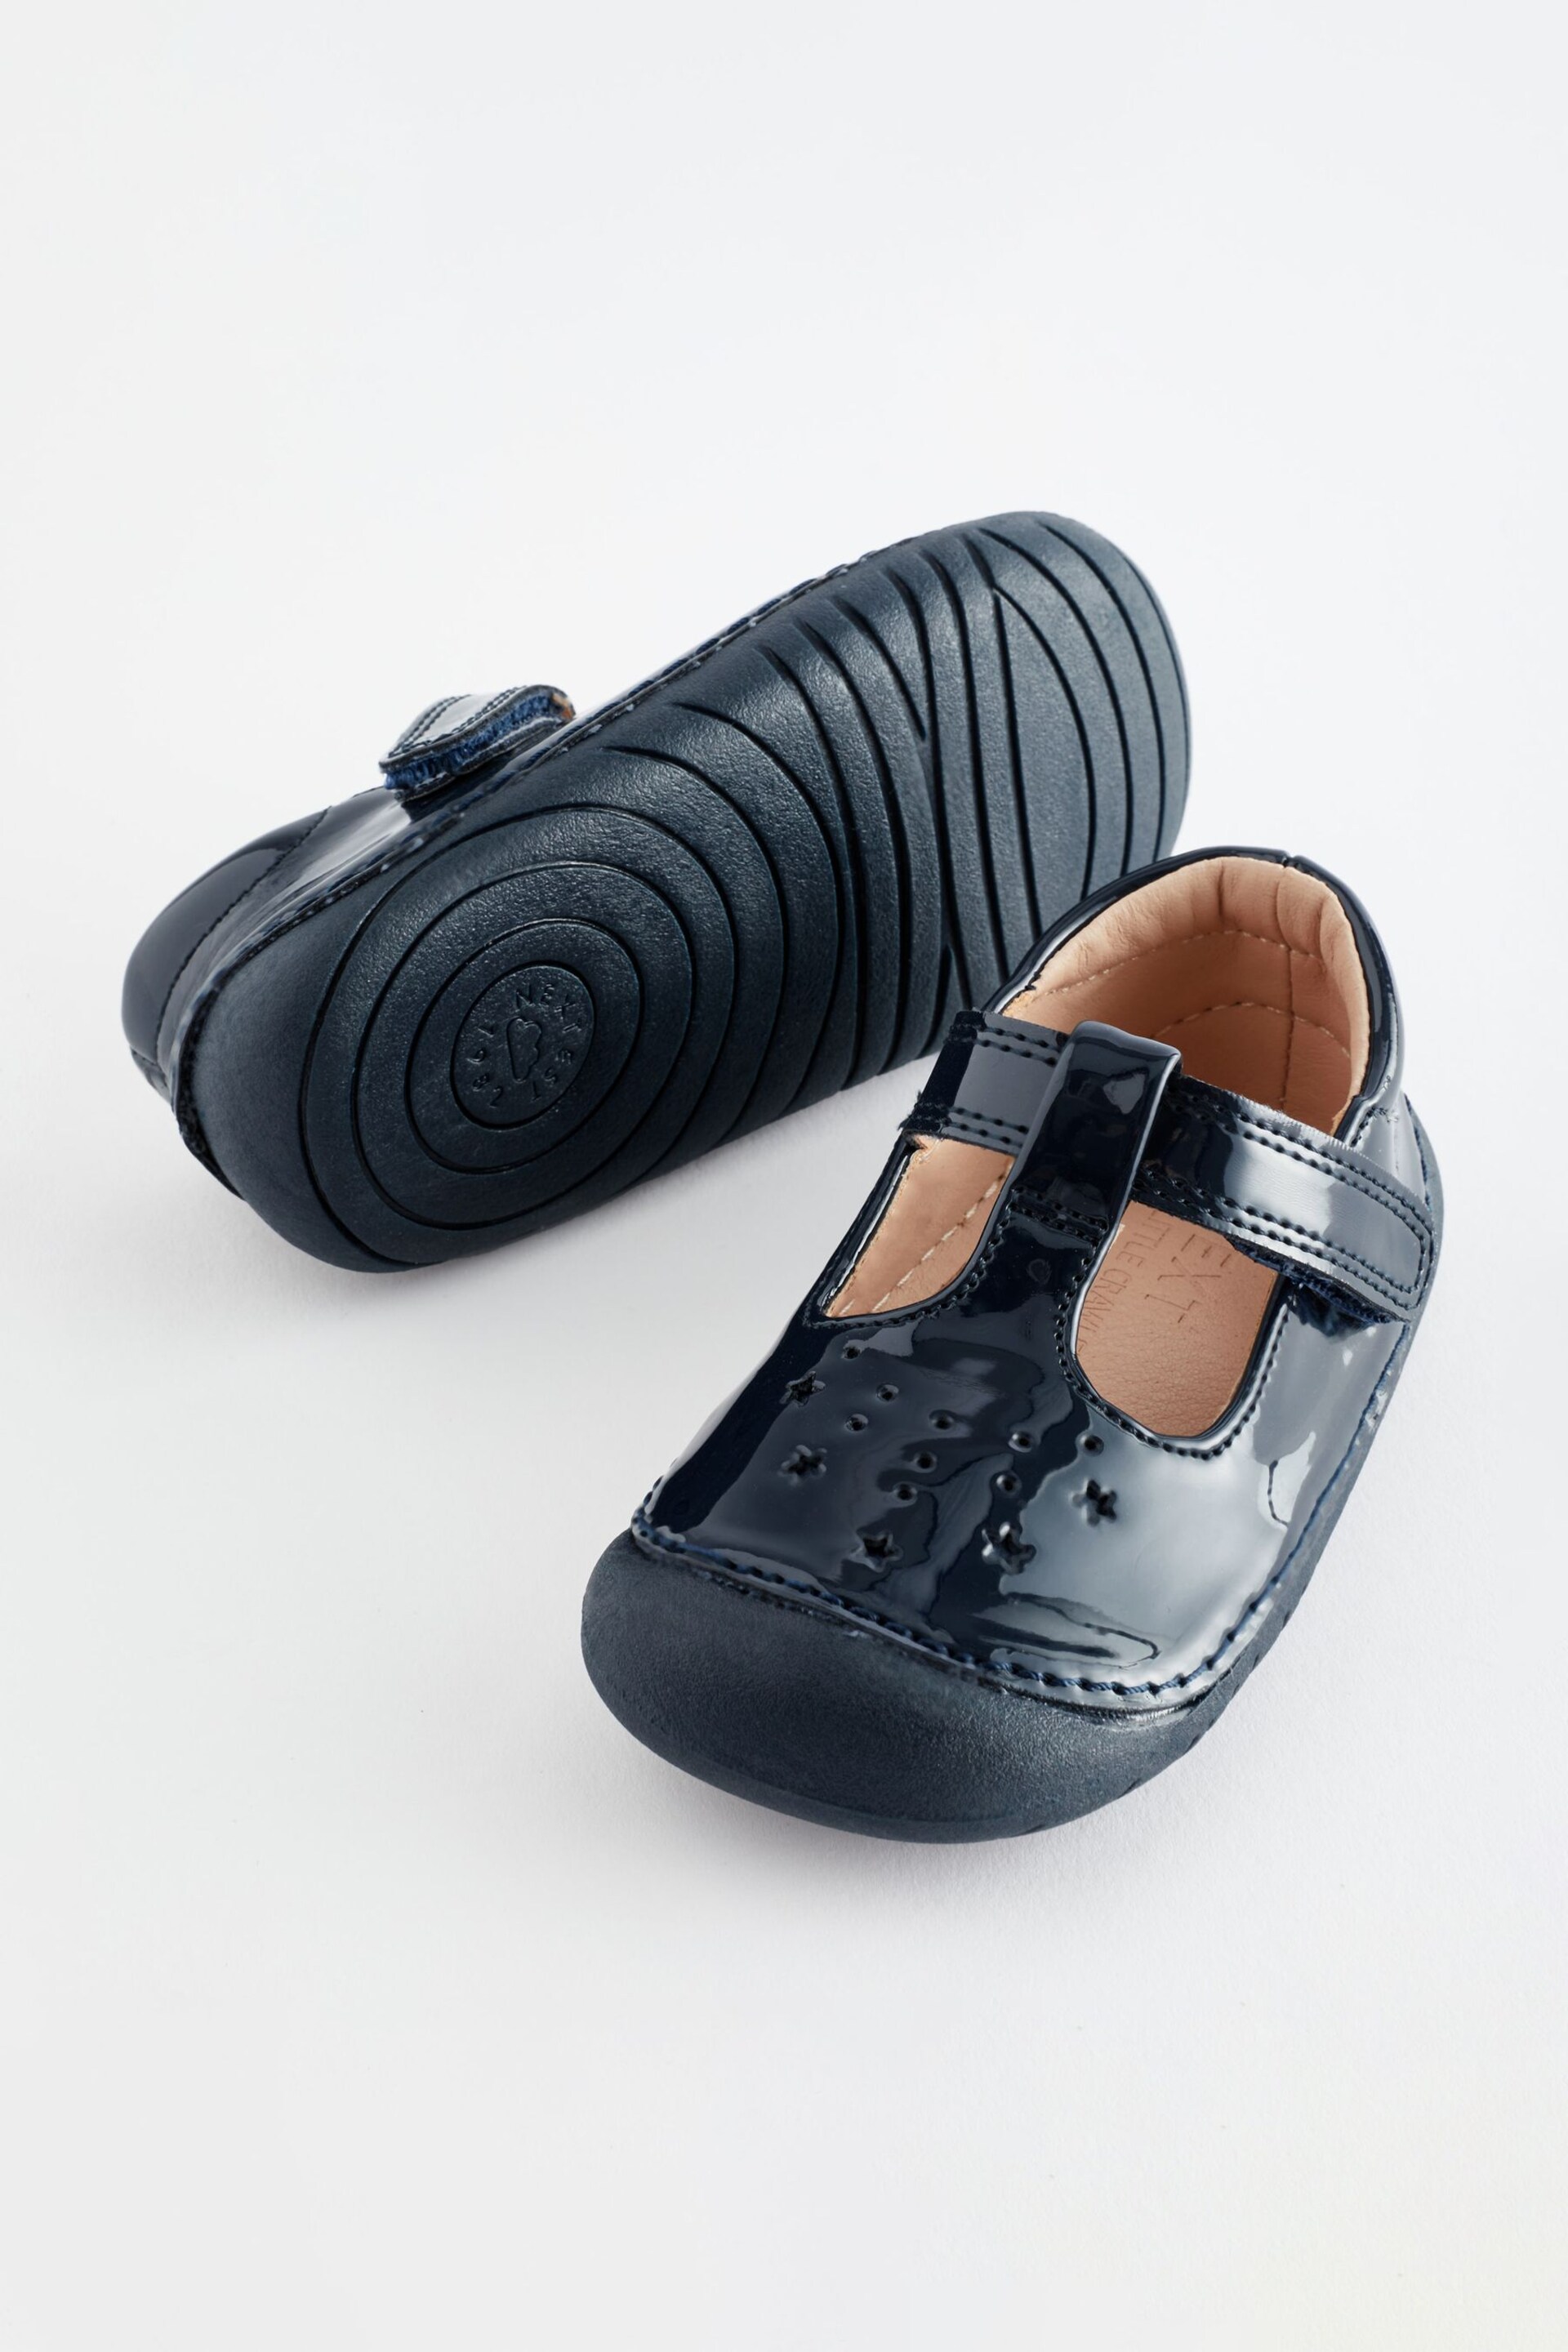 Navy Blue Patent Wide Fit (G) Crawler T-Bar Shoes - Image 4 of 5